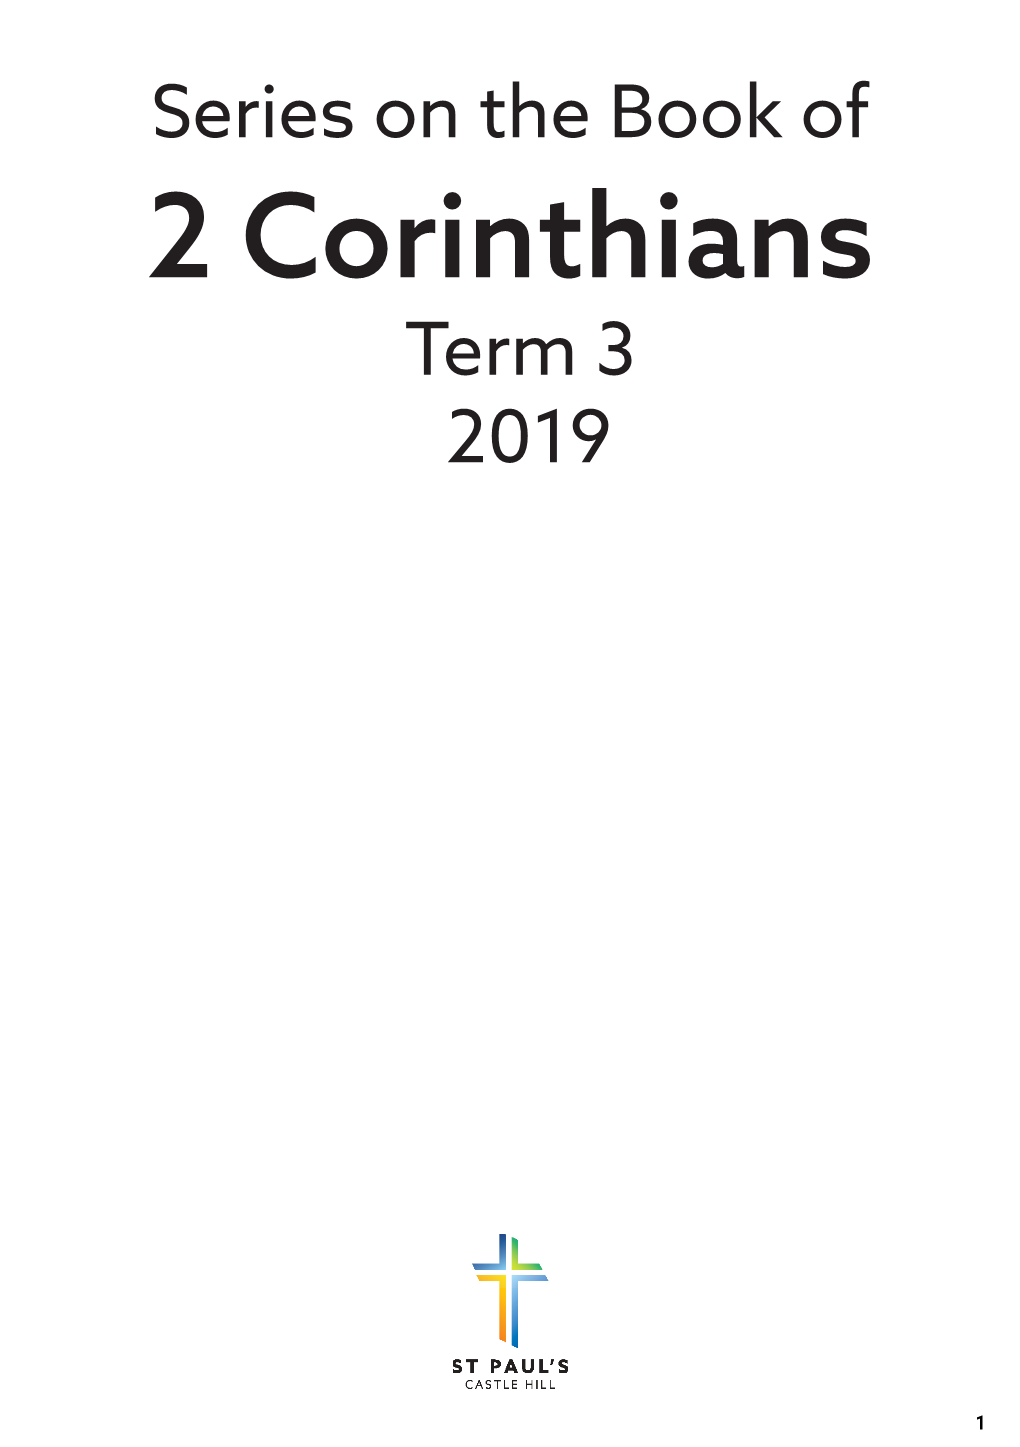 Series on the Book of 2 Corinthians Term 3 2019